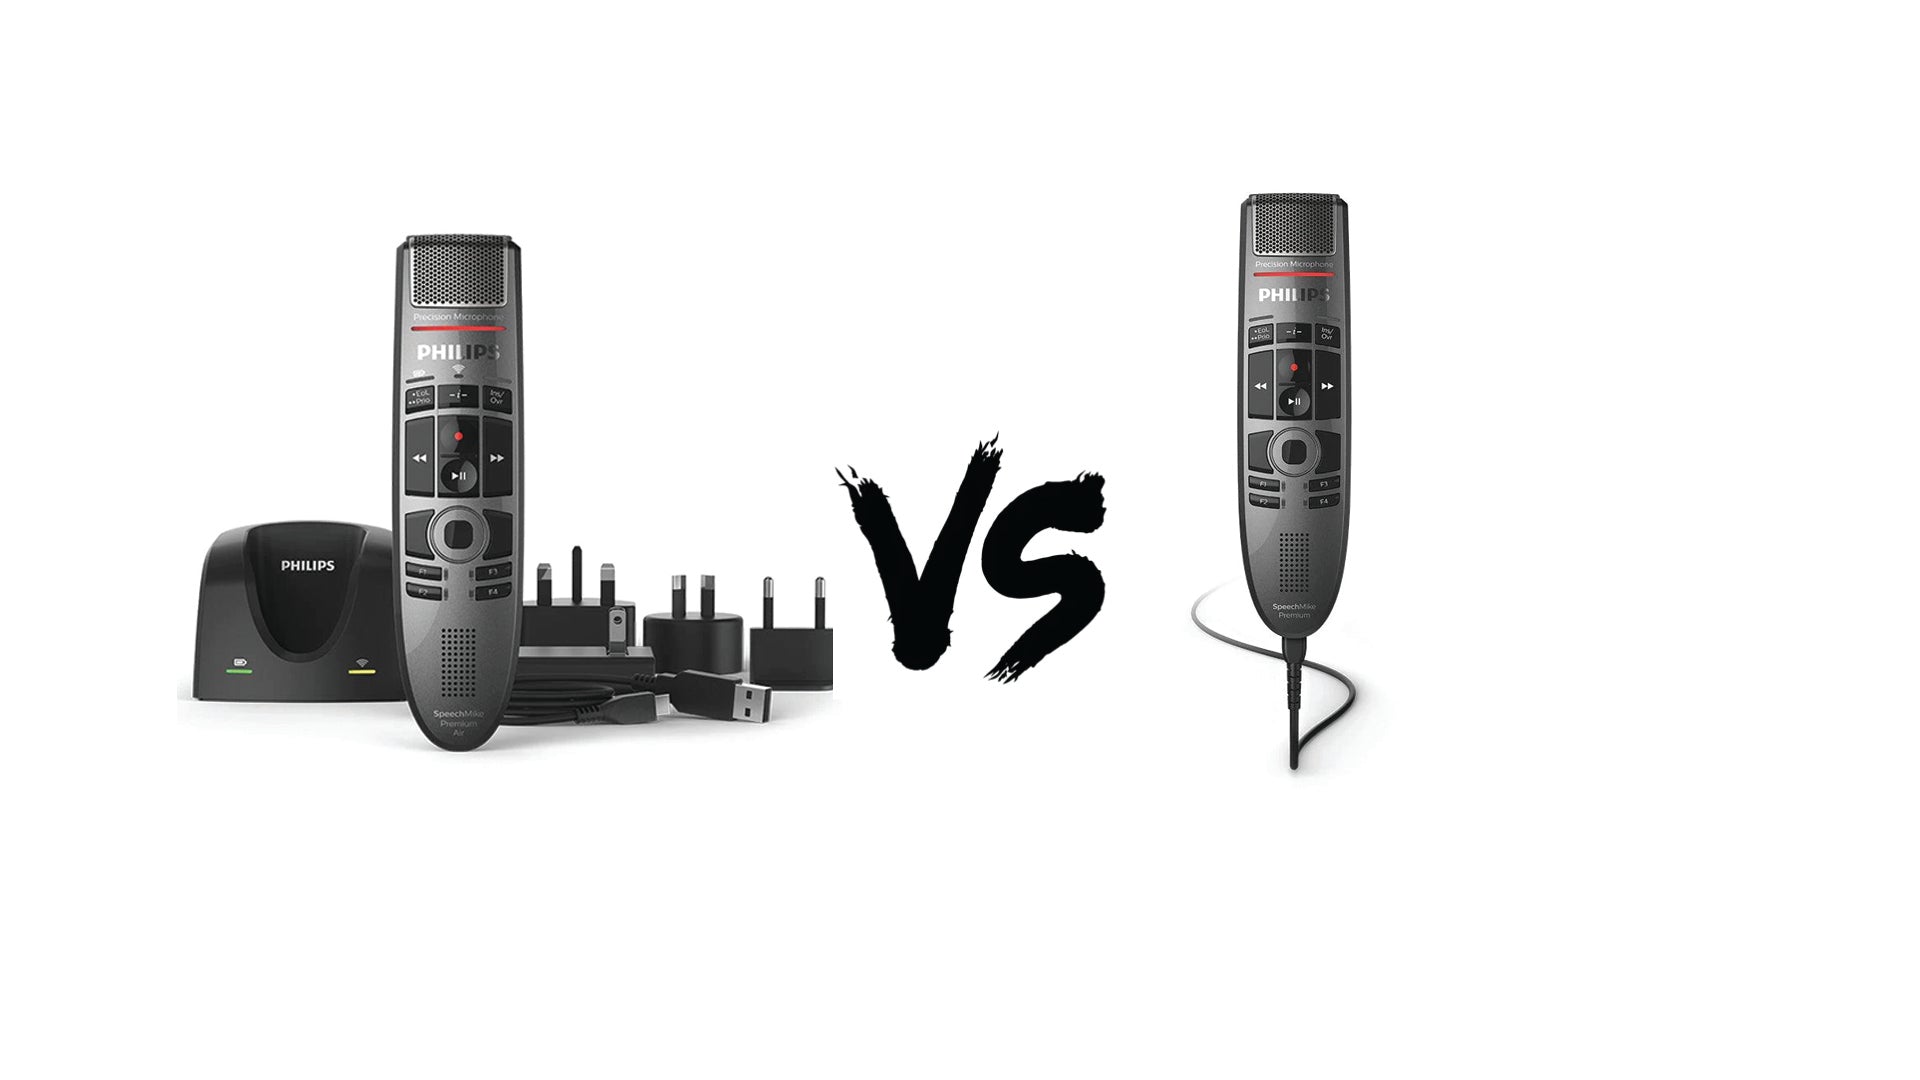 Philips SMP3700 VS PHILIPS SMP4000